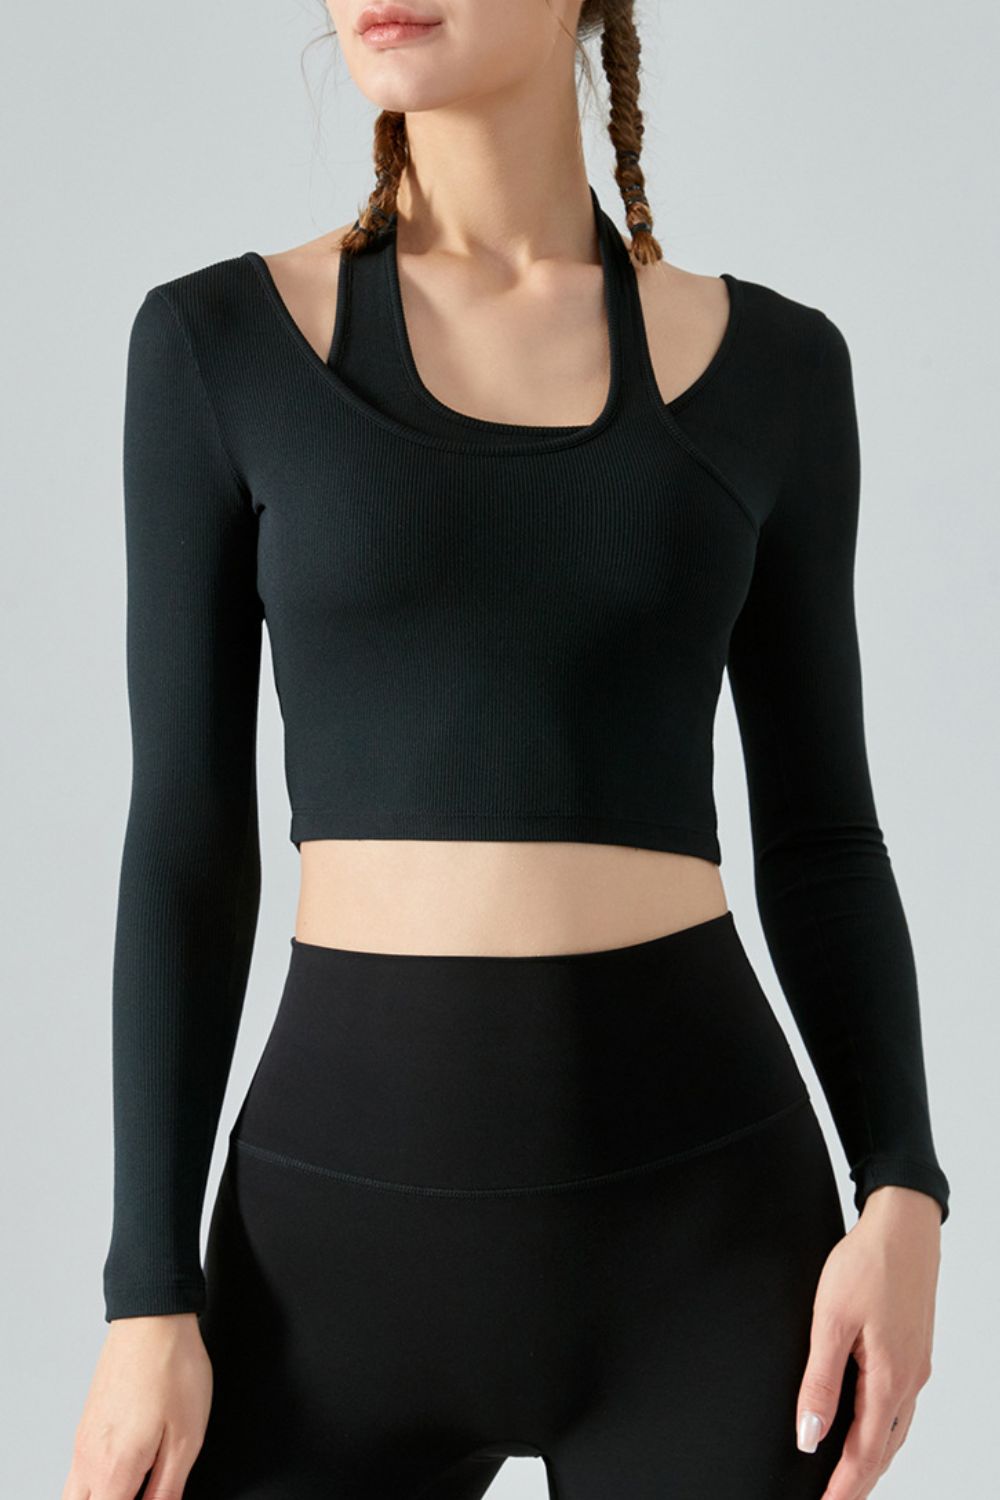 Women’s Halter Neck Long Sleeve Cropped Sports Top